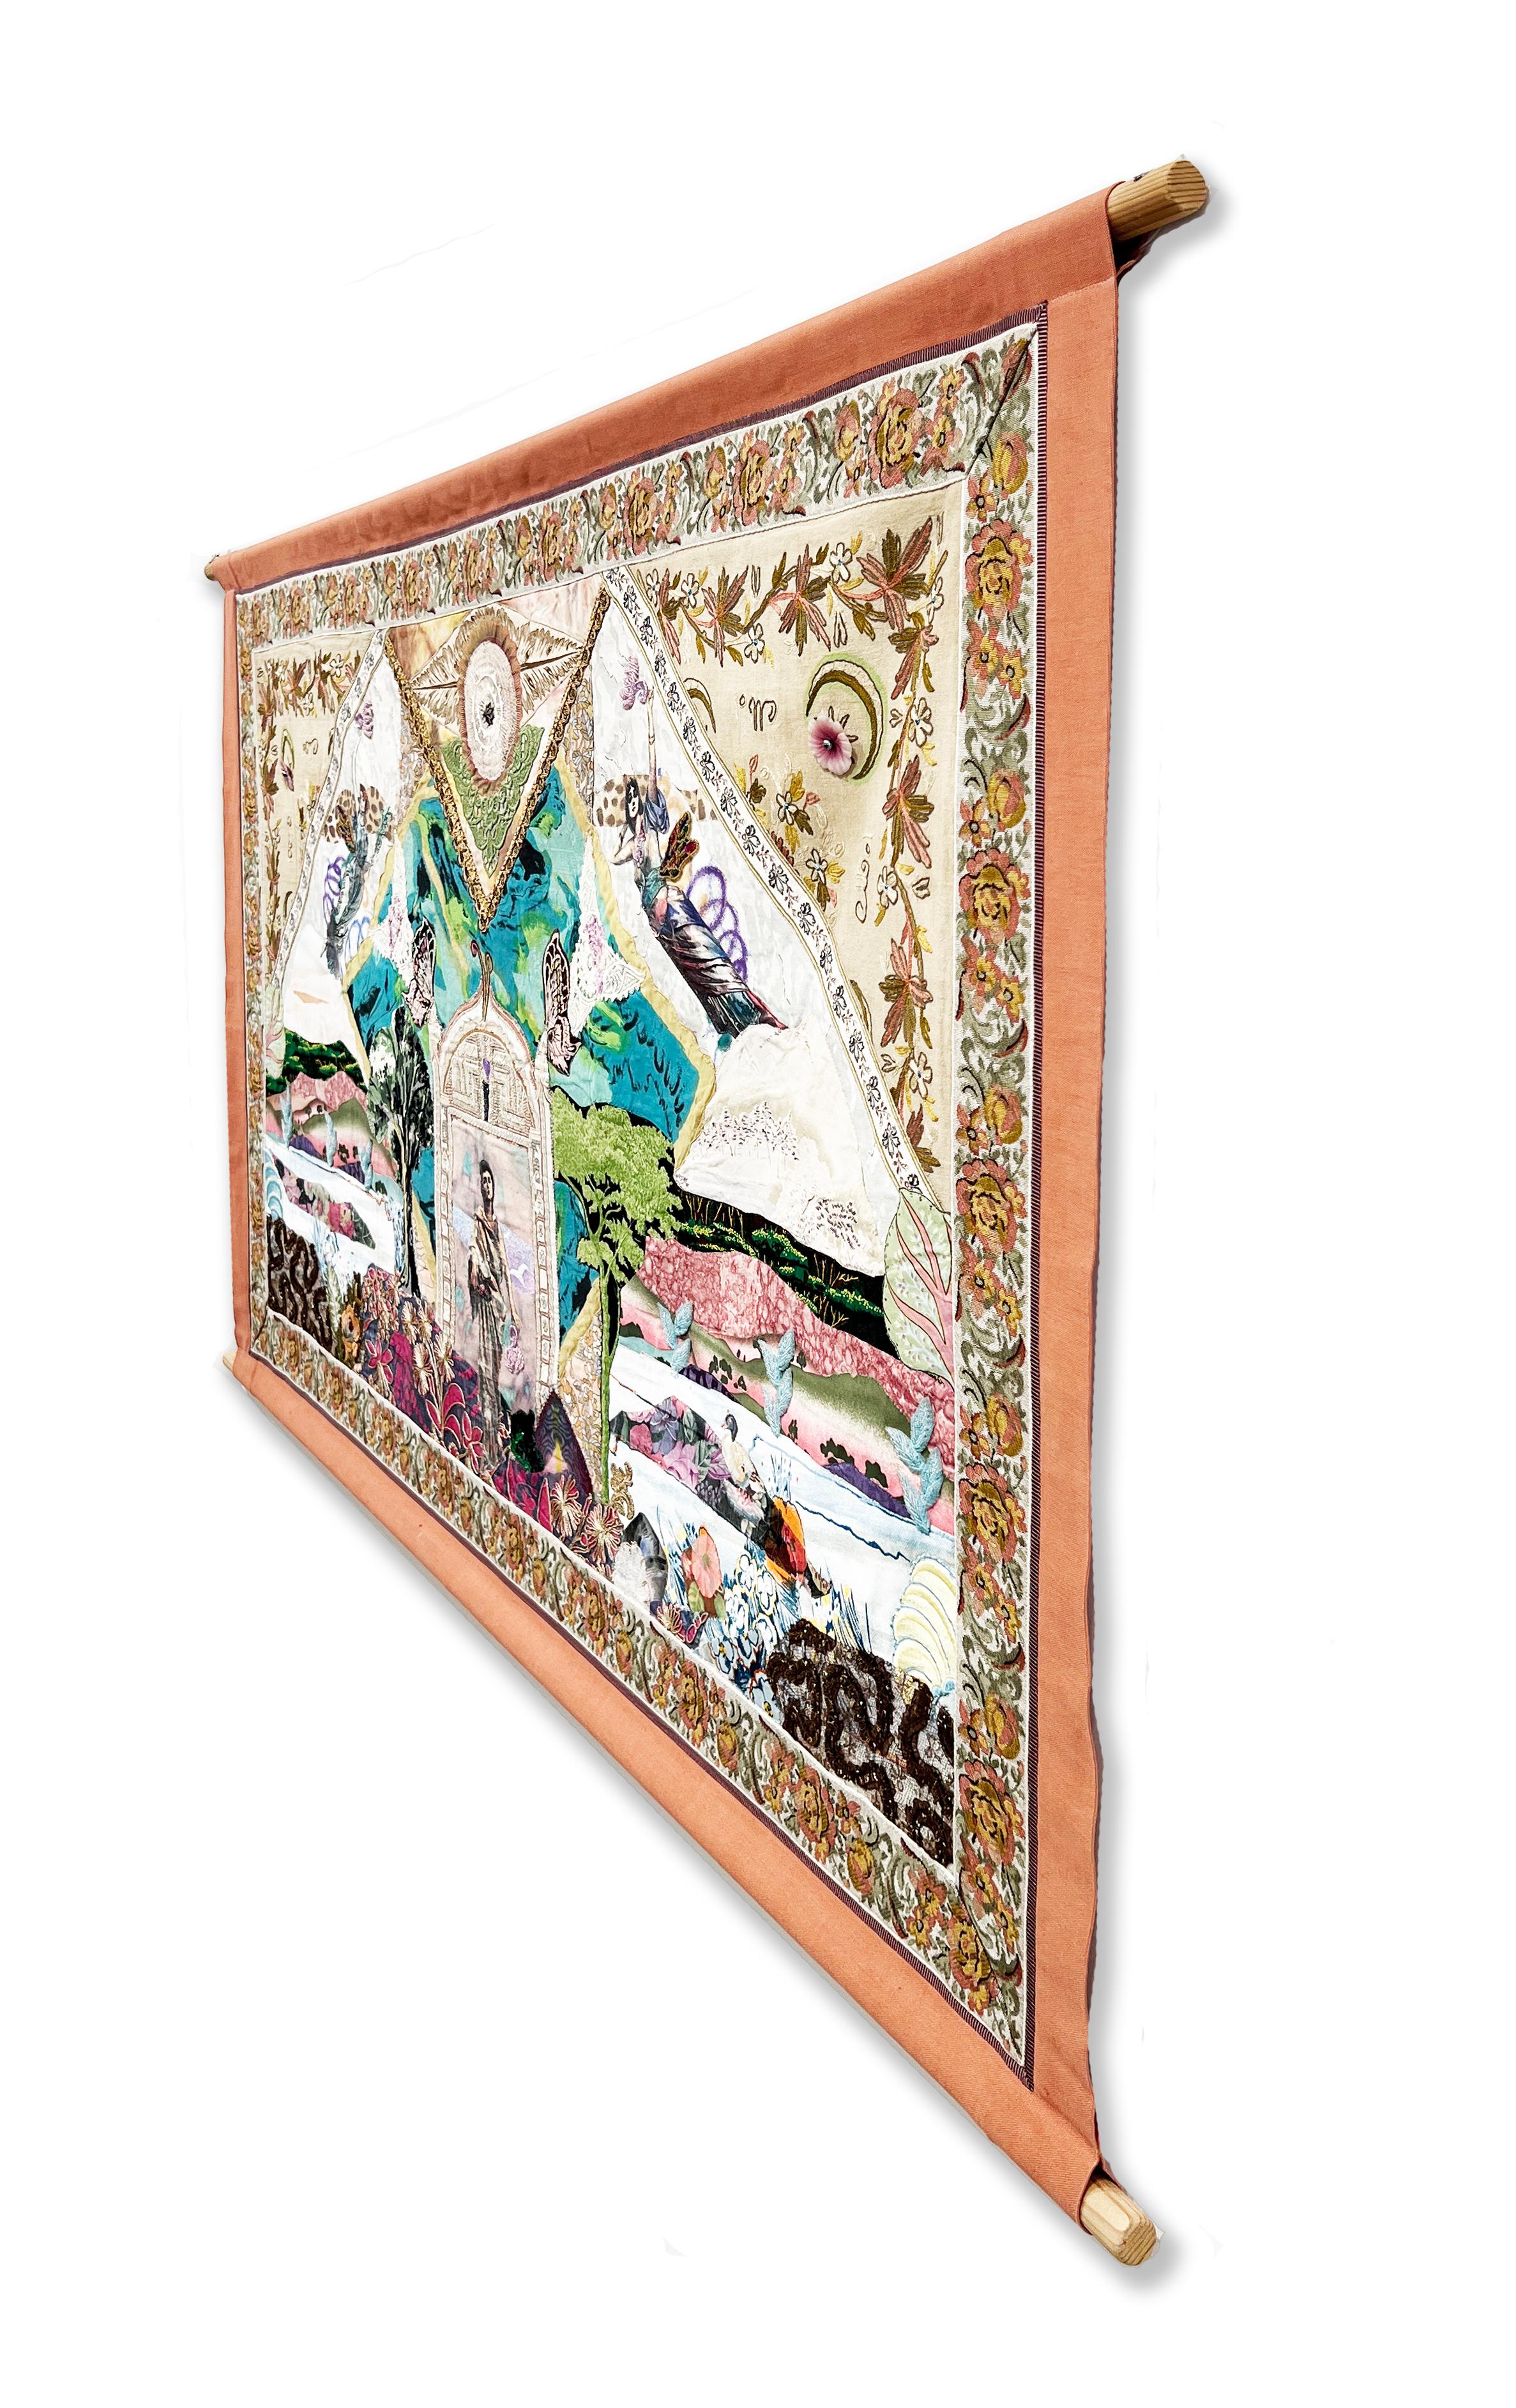 This gorgeous, horizontal embellished tapestry measures 45 inches tall and 74 inches wide. It is a collage of hand painted and dyed fabrics, vintage textiles, trimmings, and antique bead embellishments. This textural tapestry comes with two wooden